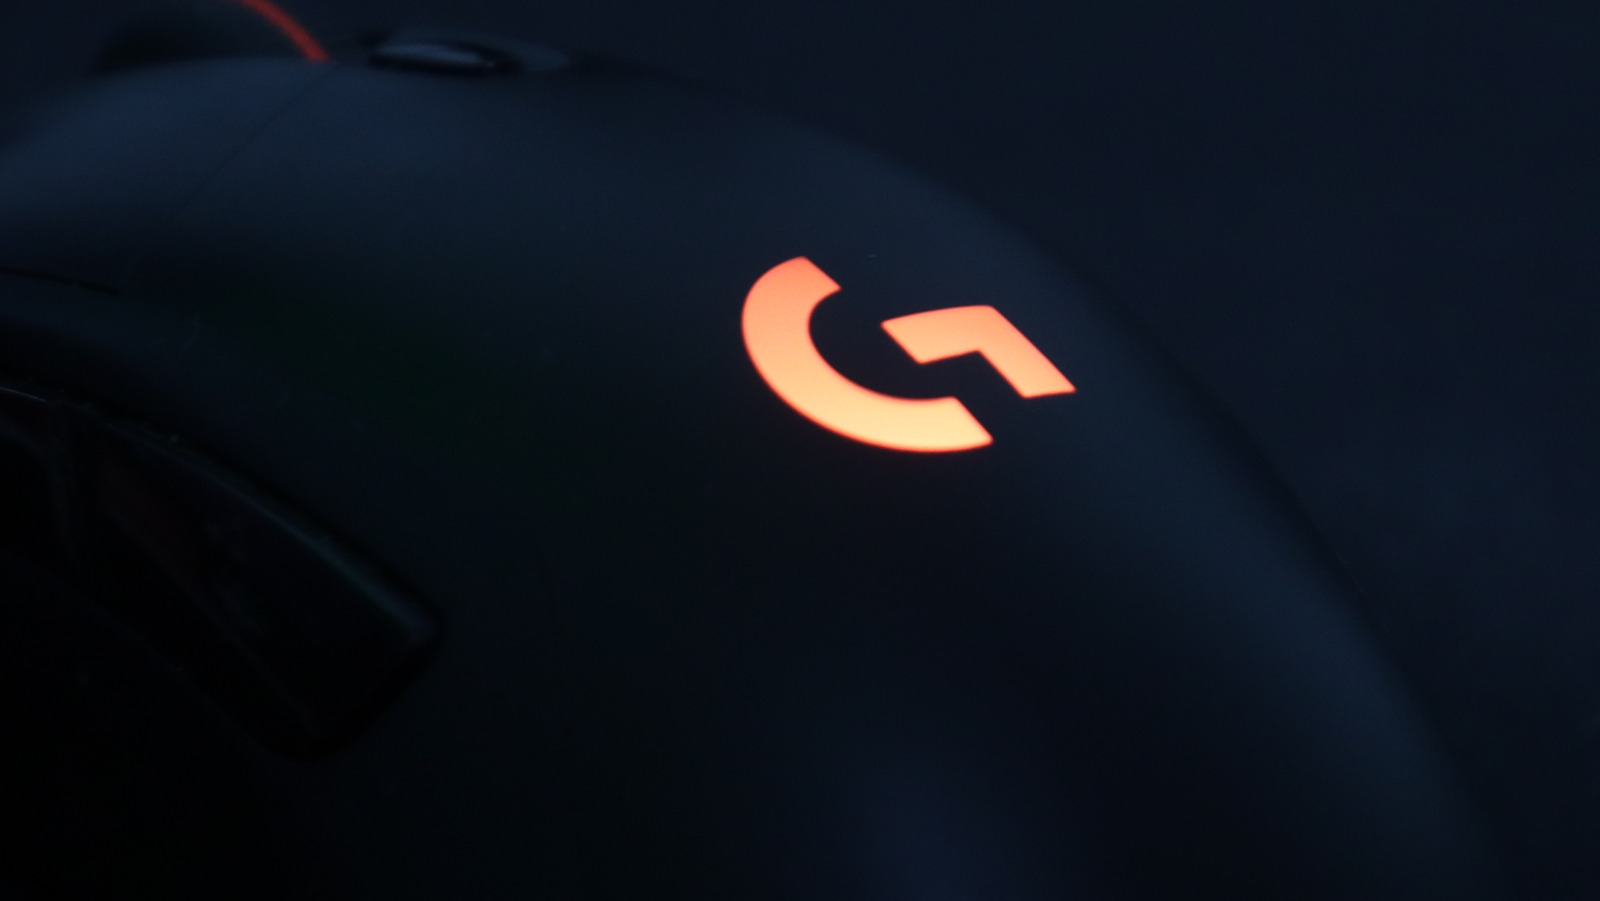 Logitech G’s Mysterious Gaming Device Will Support Xbox And NVIDIA’s Clouds